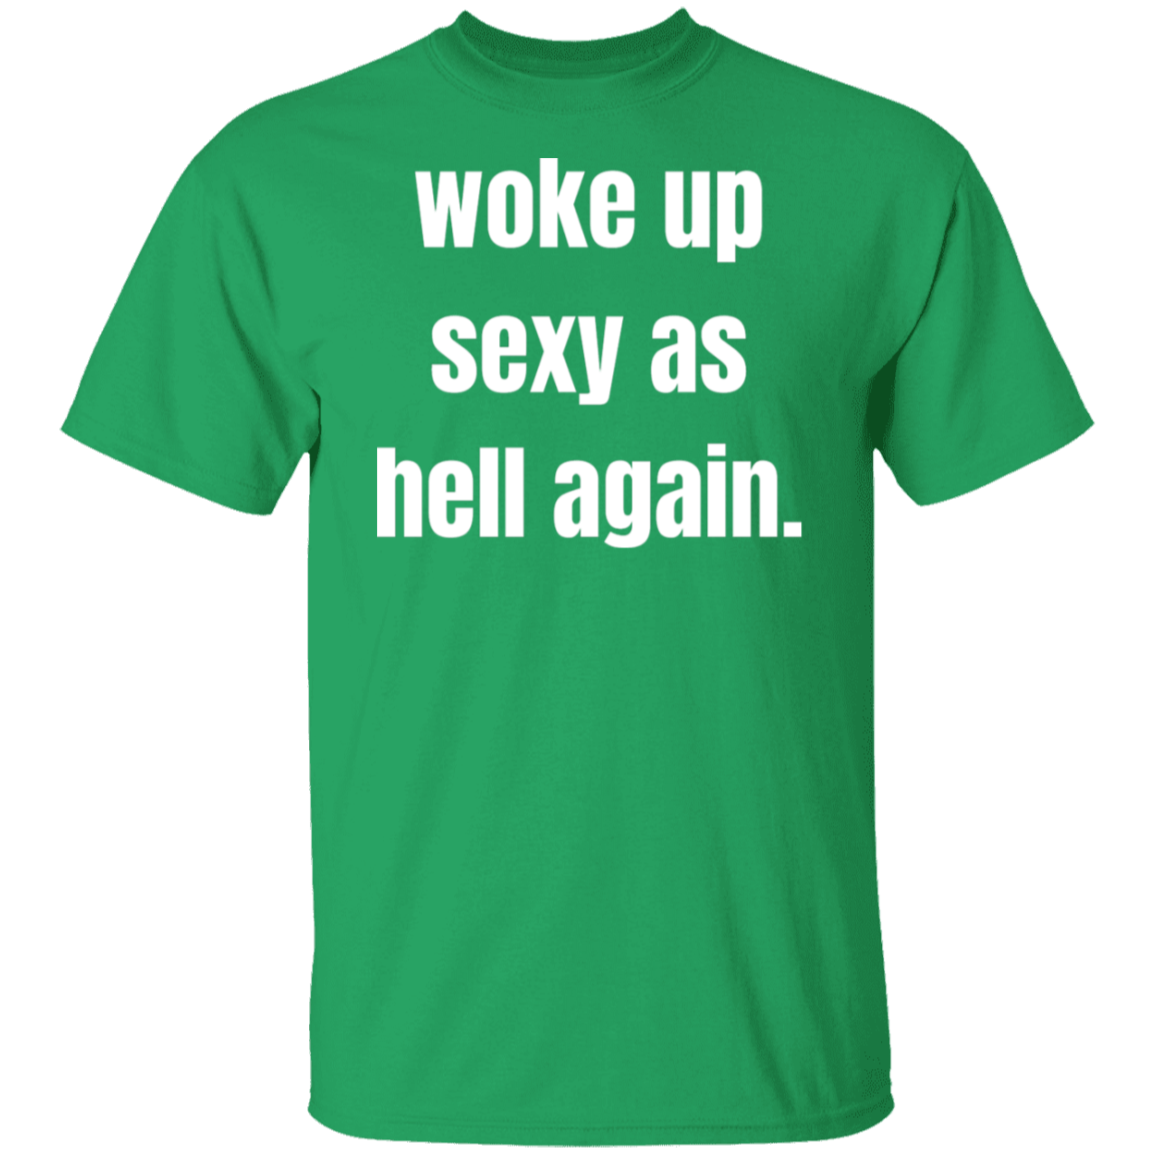 woke up sexy as hell again T-Shirt for that Sexy someone in your life!